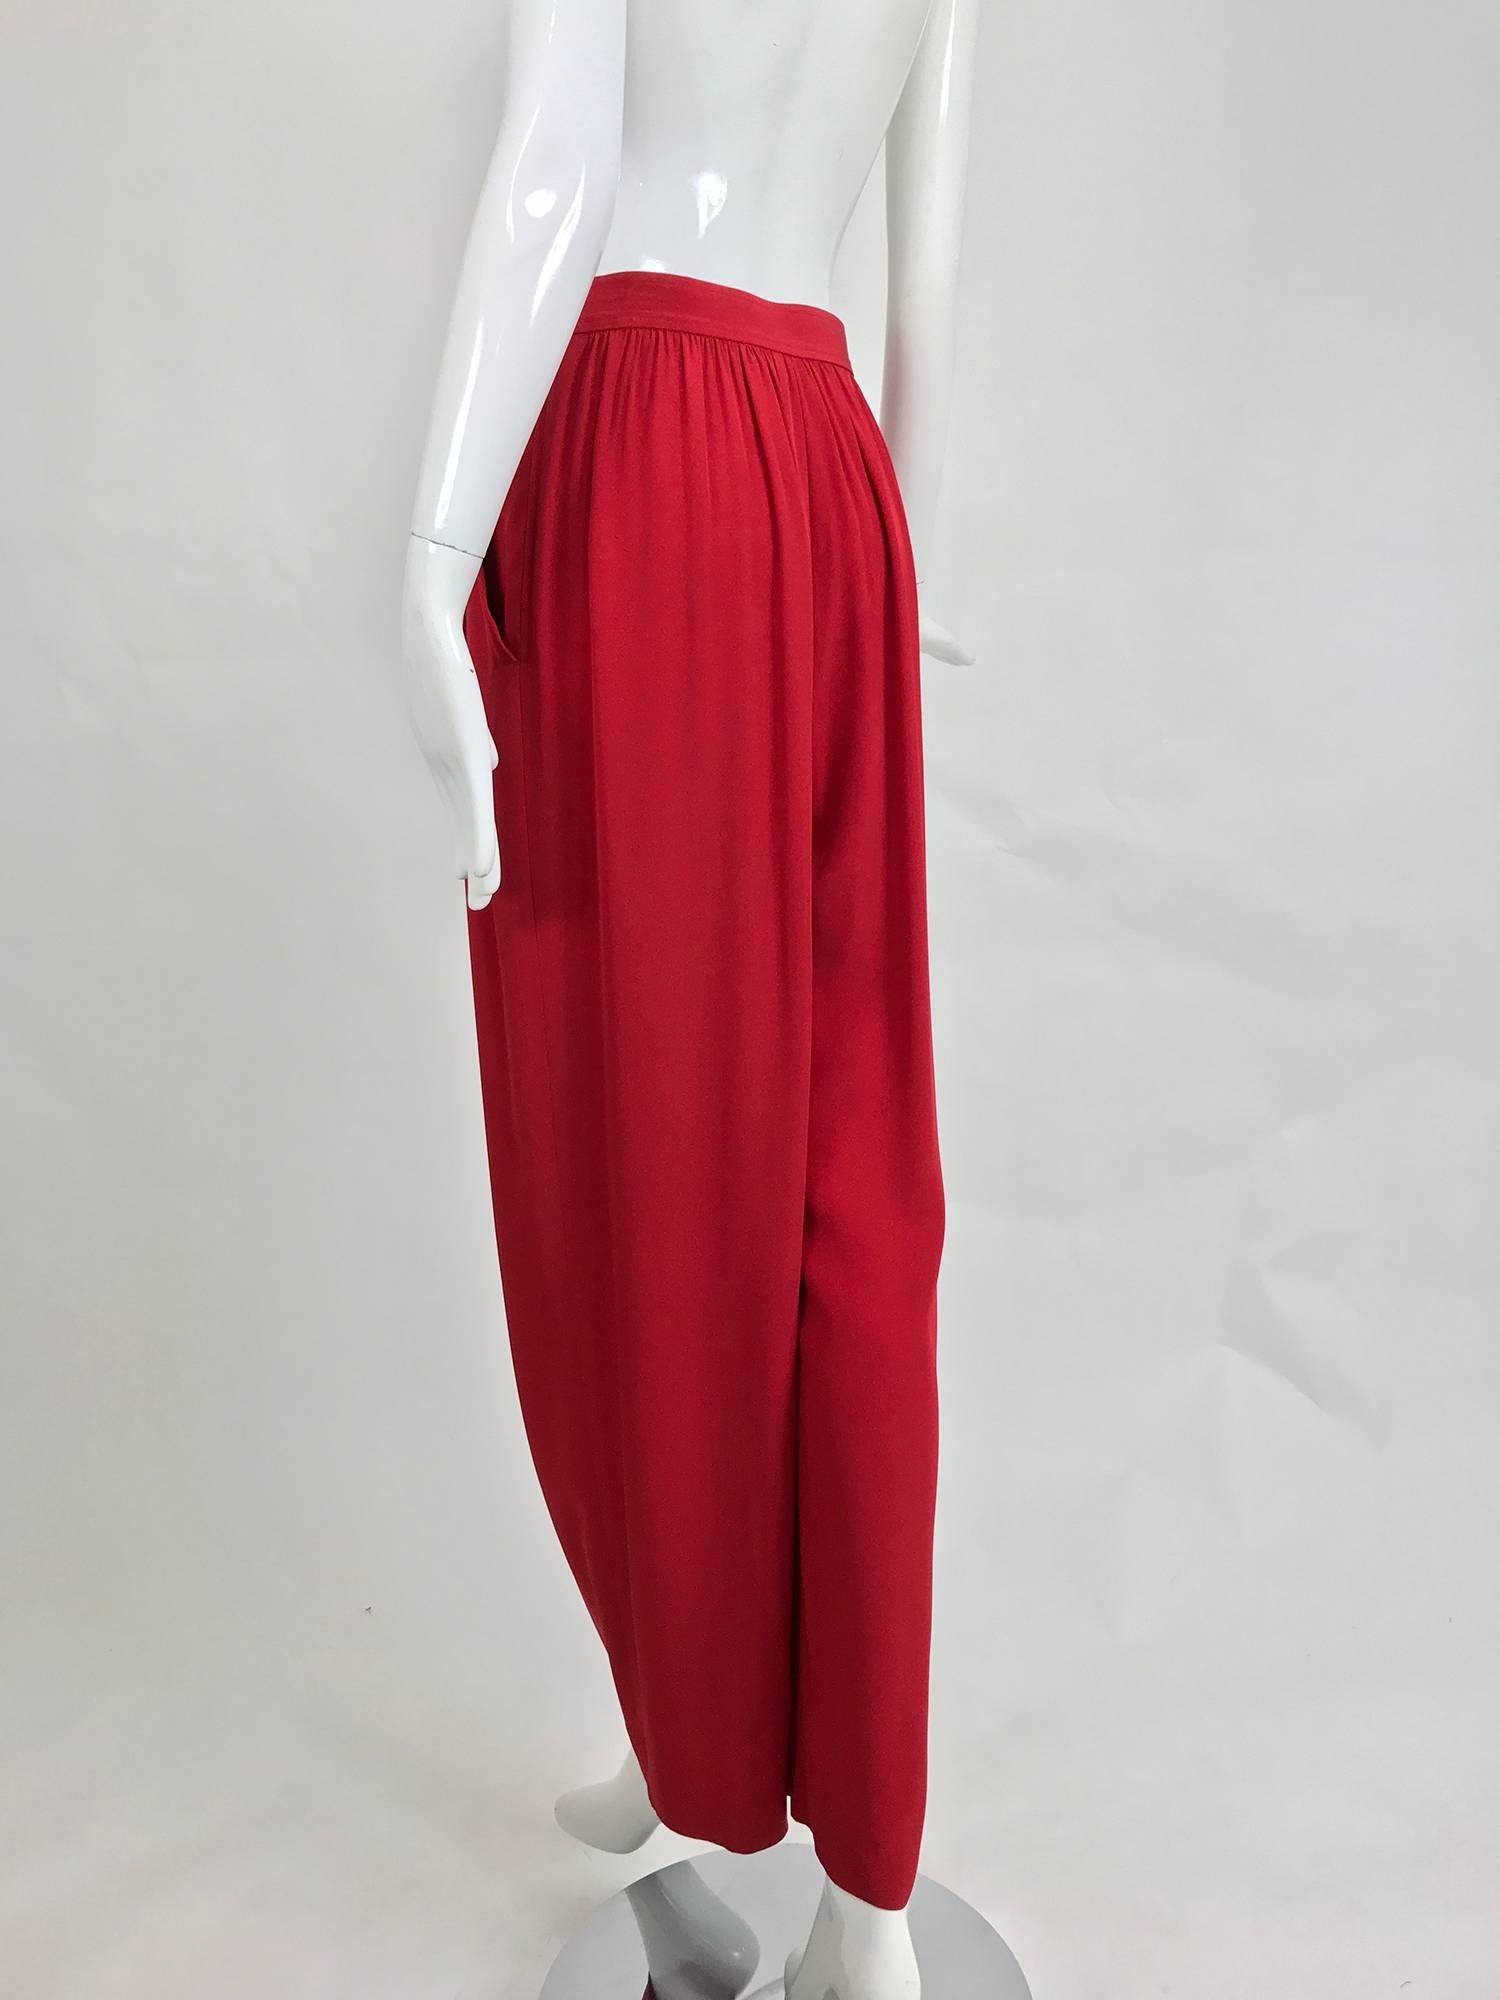 Red Vintage Yves Saint Laurent candy red satin back crepe full leg trousers 1990s